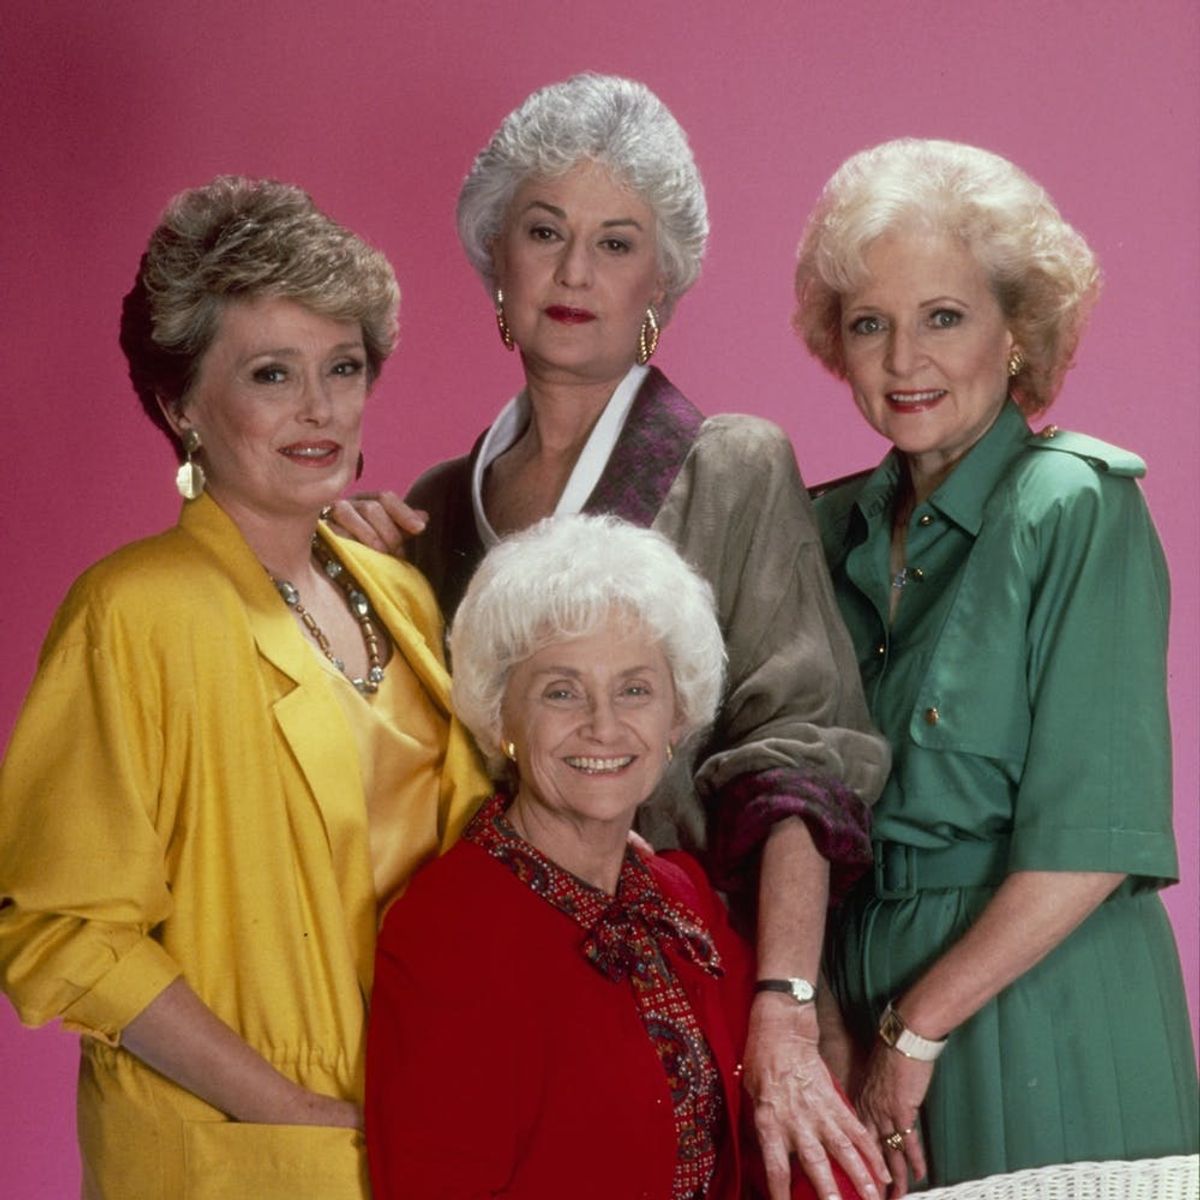 The Golden Girls Cafe Is Officially Open for Business and We Can’t Wait to Go